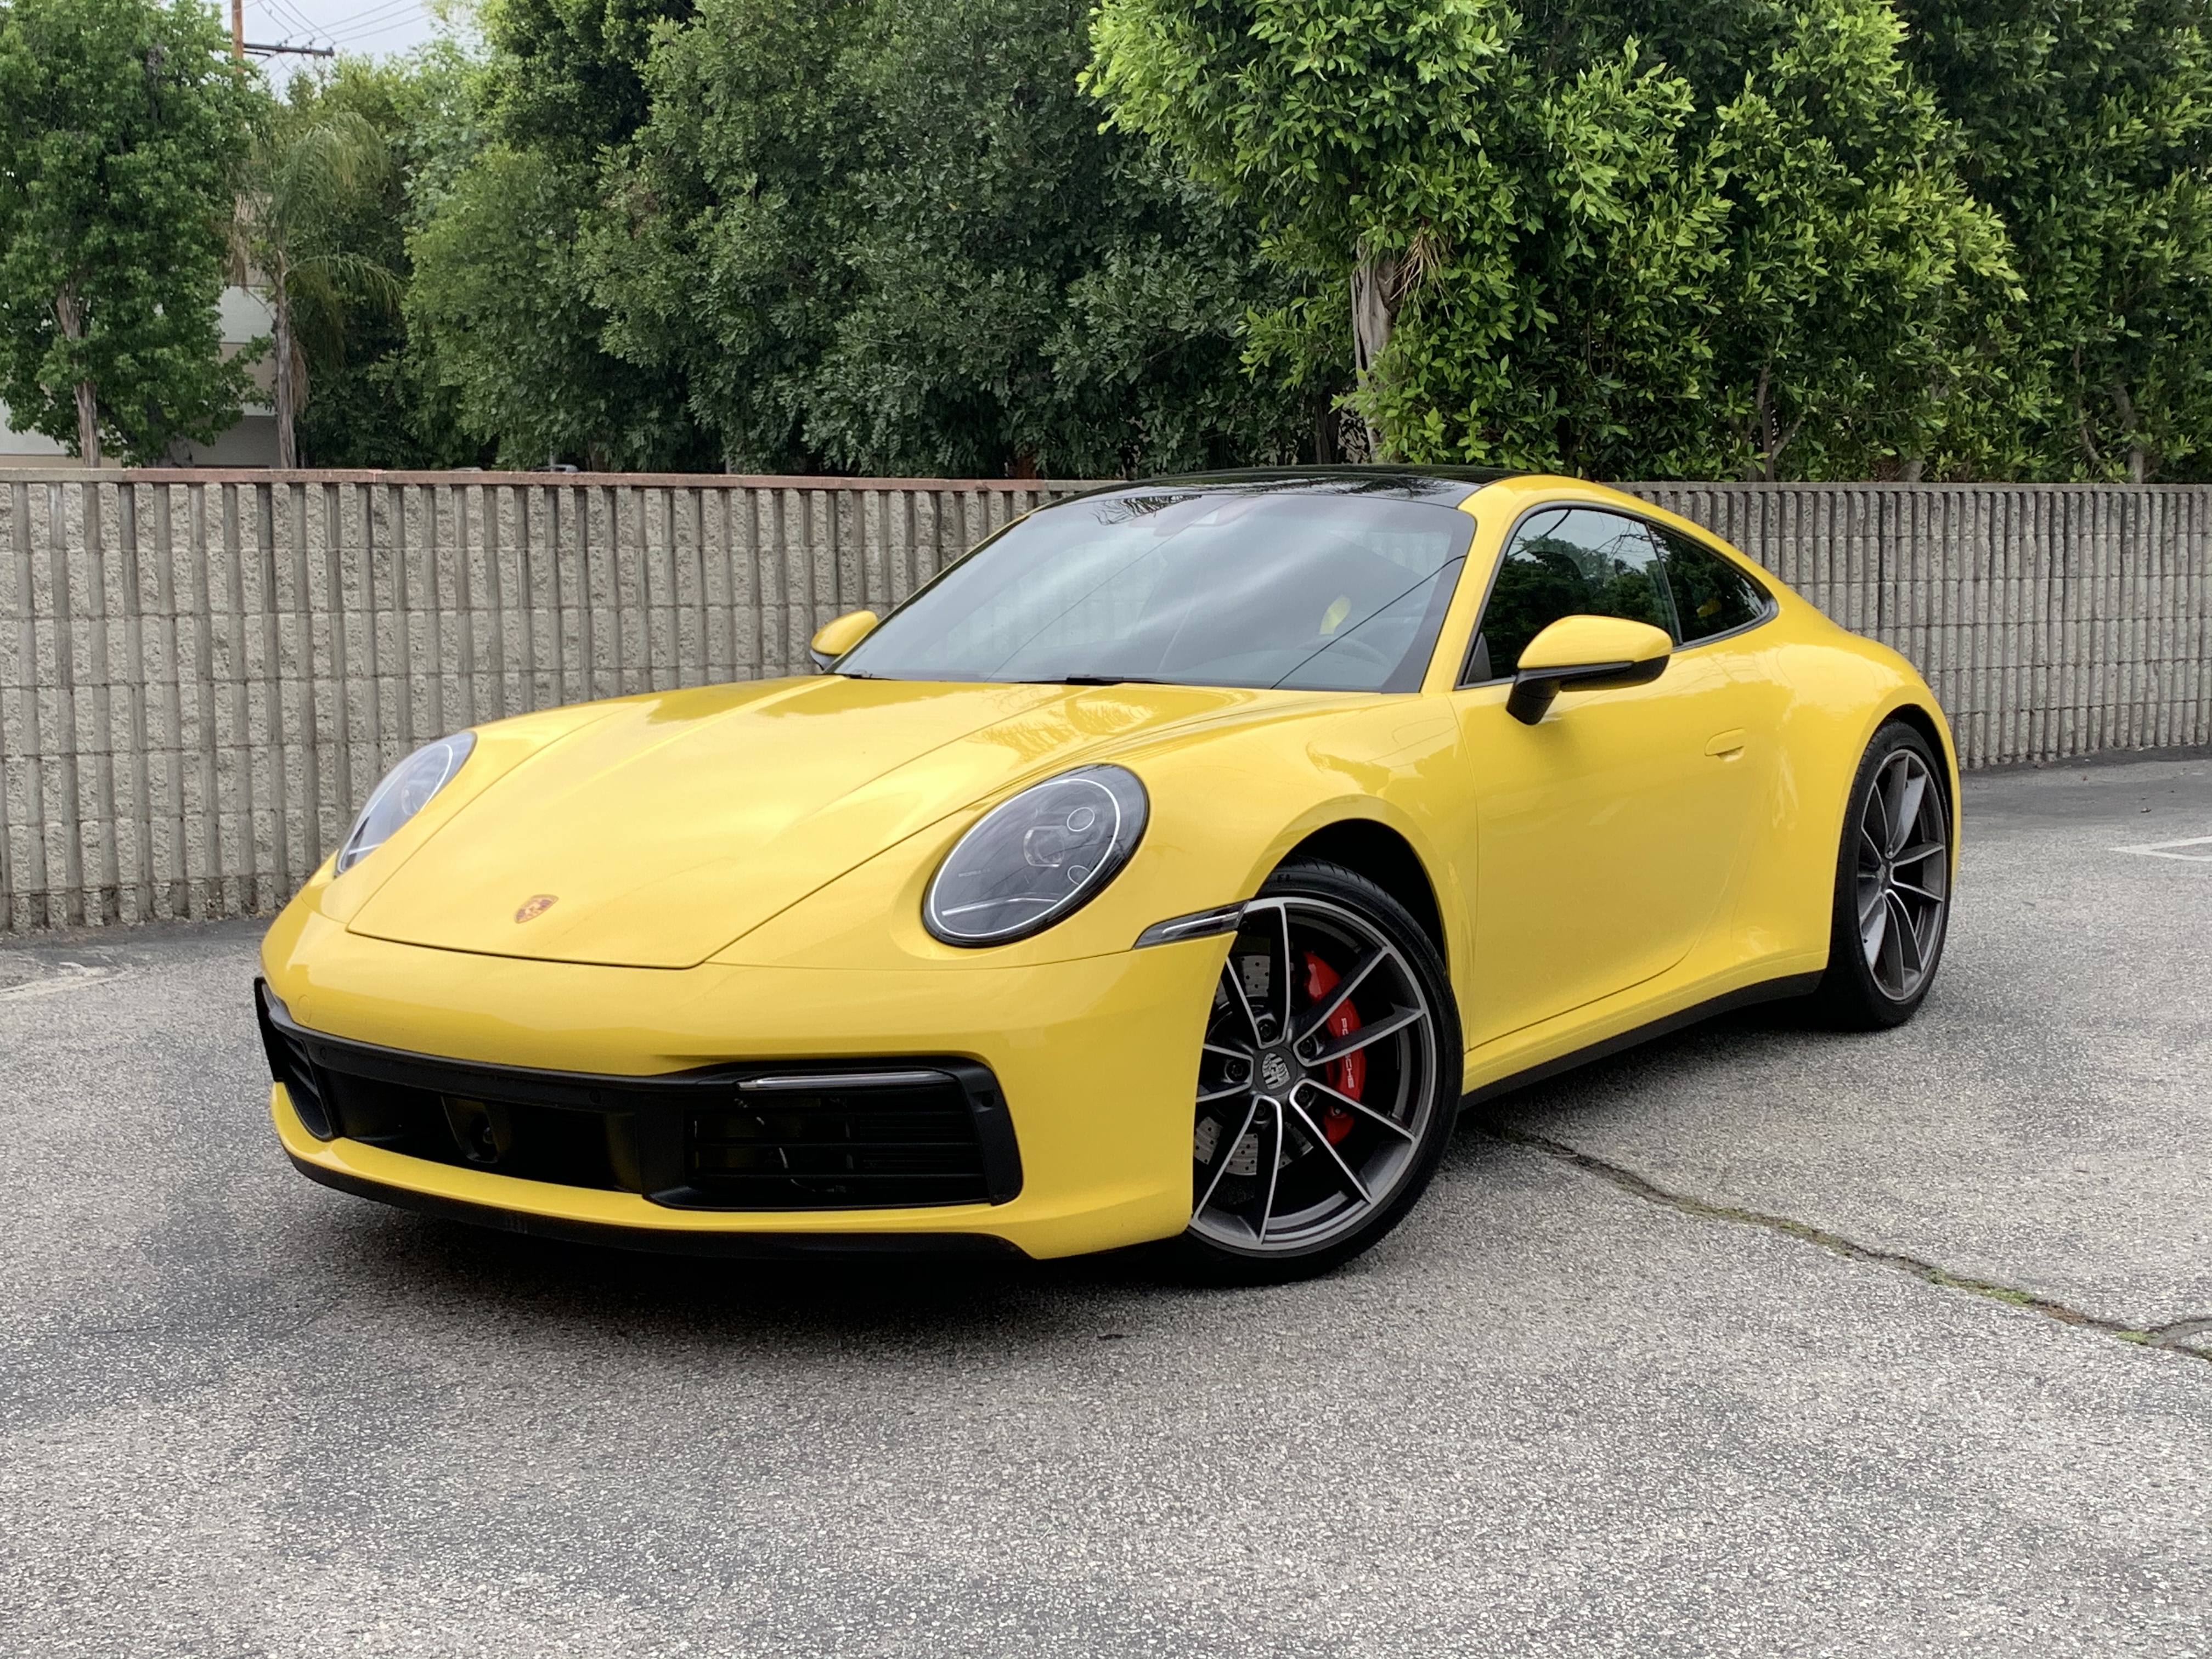 2020-Porsche-Carrera-S-Coupe-For-Sale-WP0AB2A98LS227436-Racing-Yellow-1116